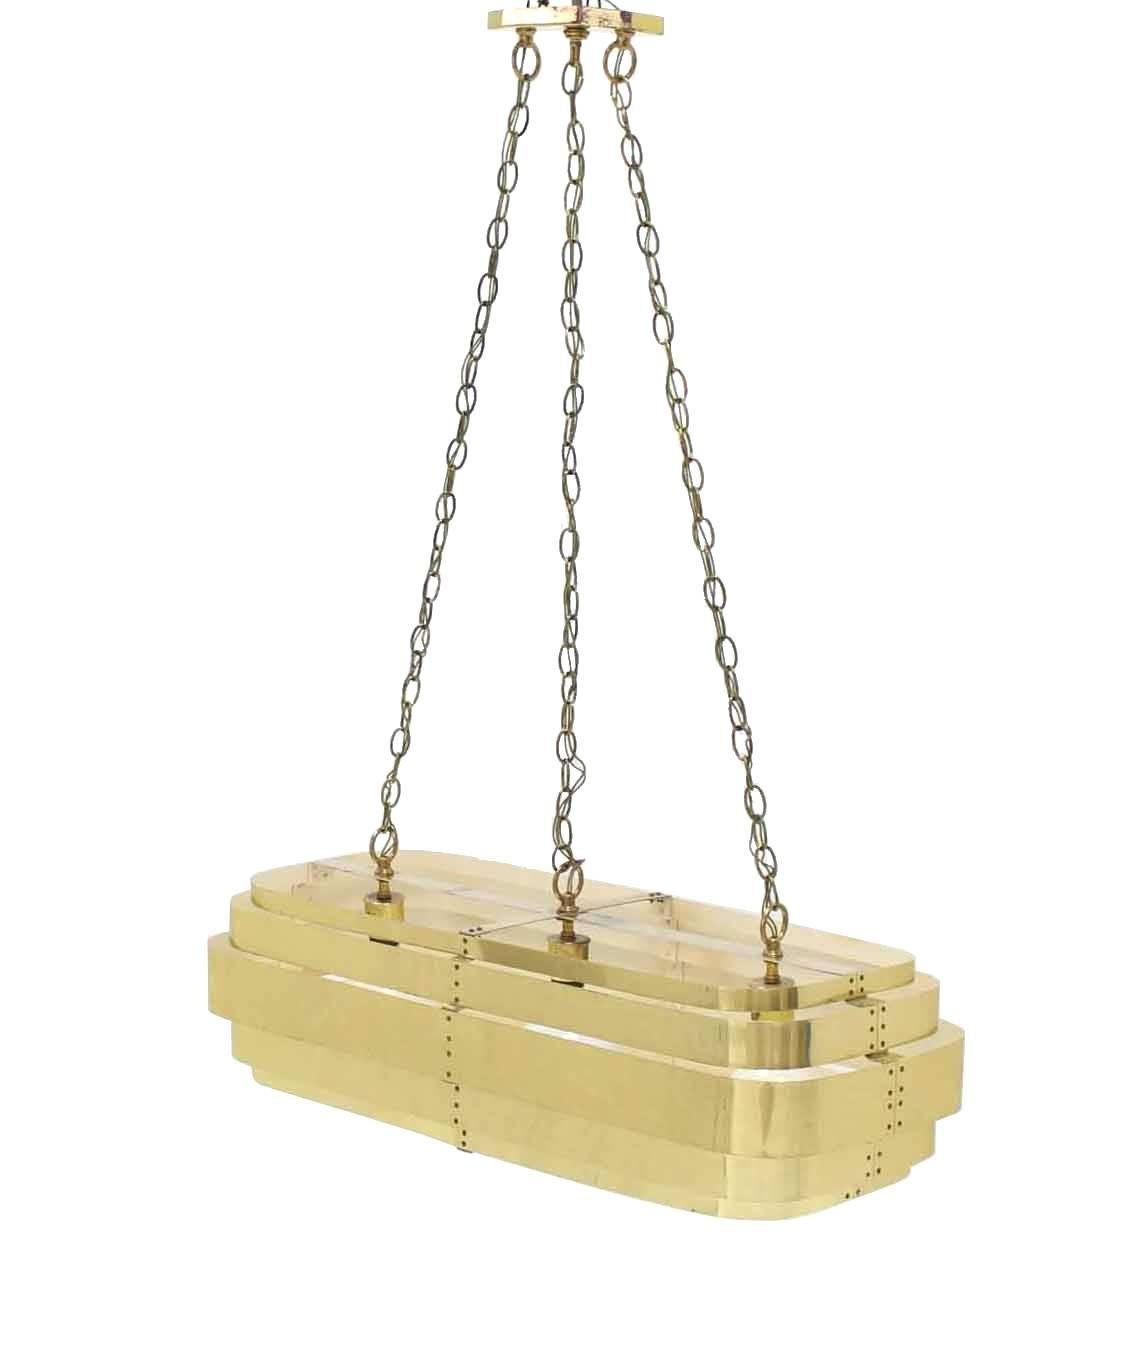 Mid-Century Modern brass light fixture pendant suspended on long chains. May be used as a pool table fixture.